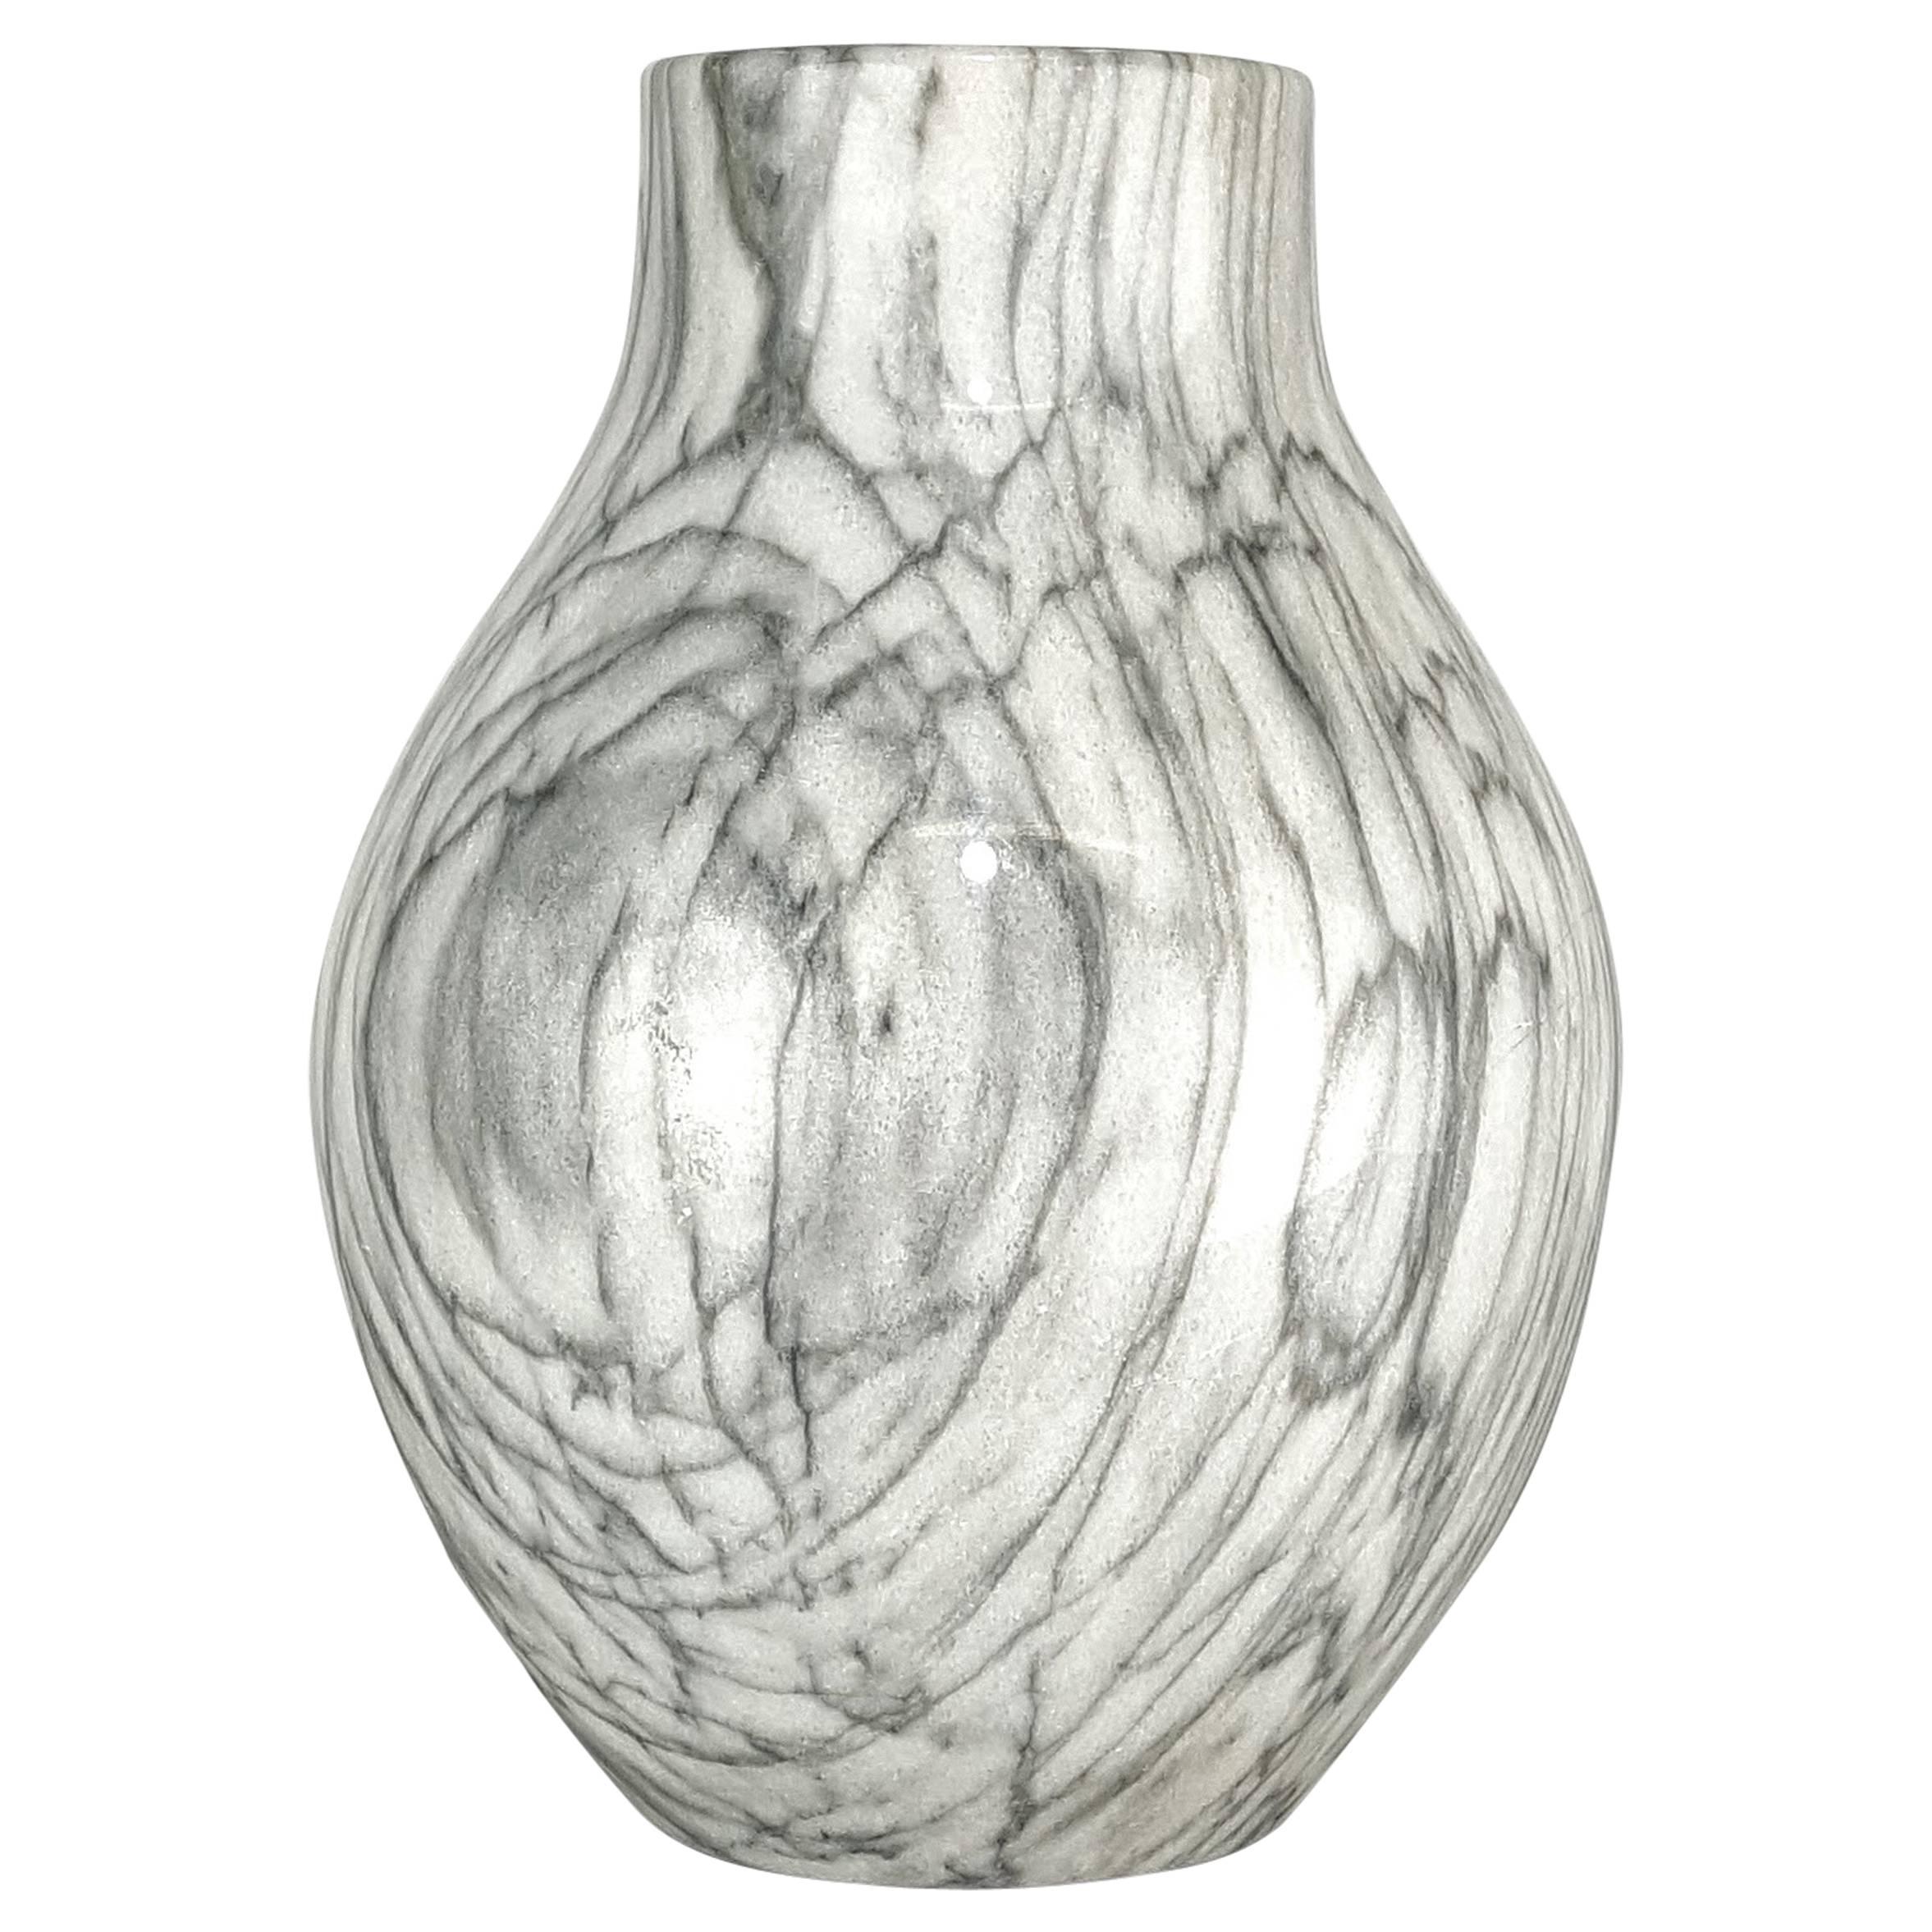 Large Handmade Vase in Wildly Grained Carrara Marble, Italy, 1950s